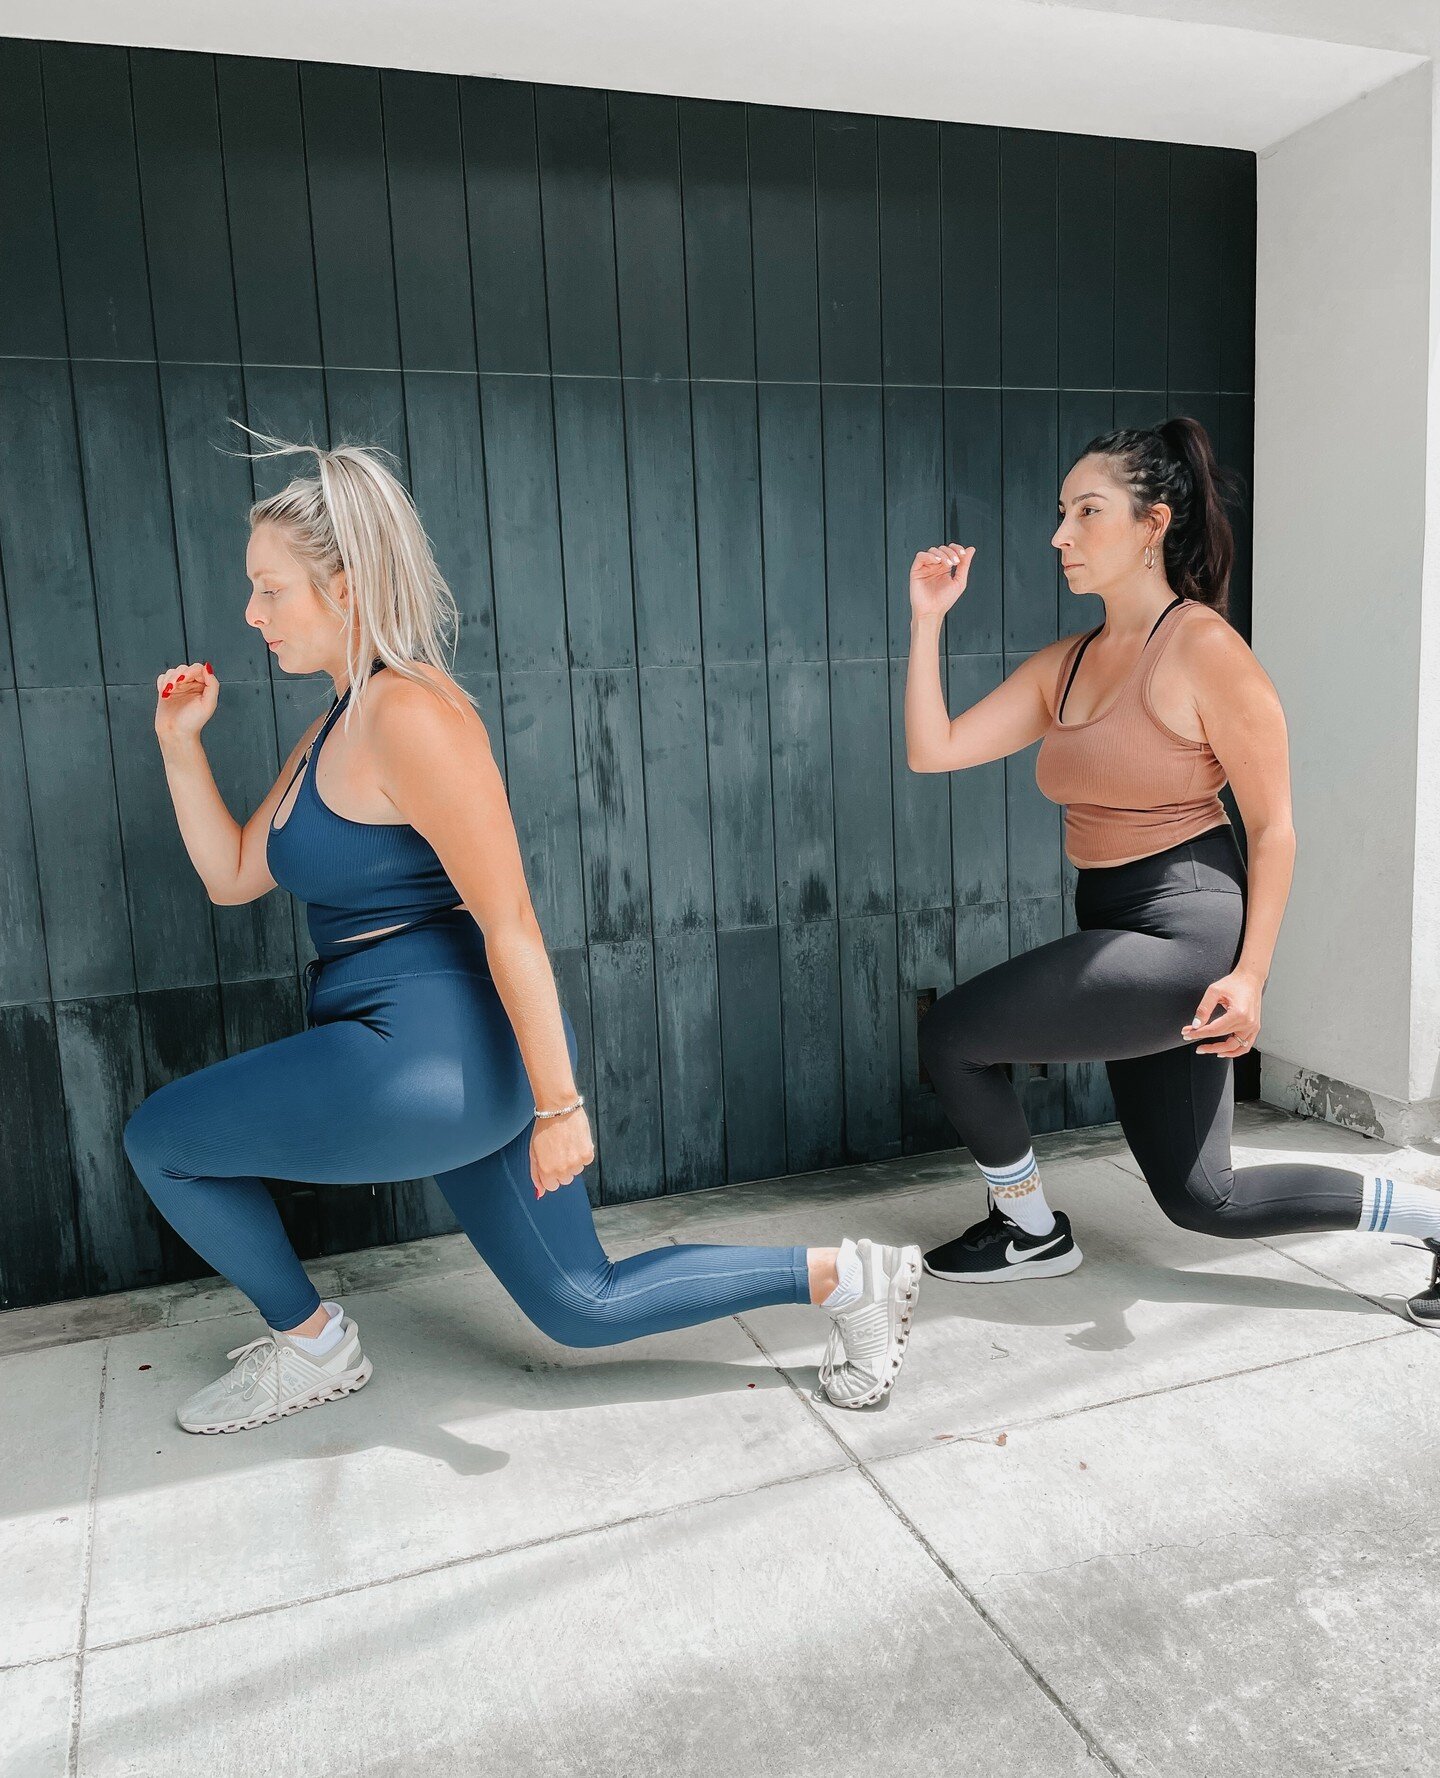 There's a new level of strength you develop in a Hot HIIT Flow class @karmayoga_studios 💪🏼⁠
⁠
You're not only strengthening your body...⁠
You're strengthening your mind &amp; your soul!⁠
⁠
Come join us for a complimentary HHF class in Butler Park, 